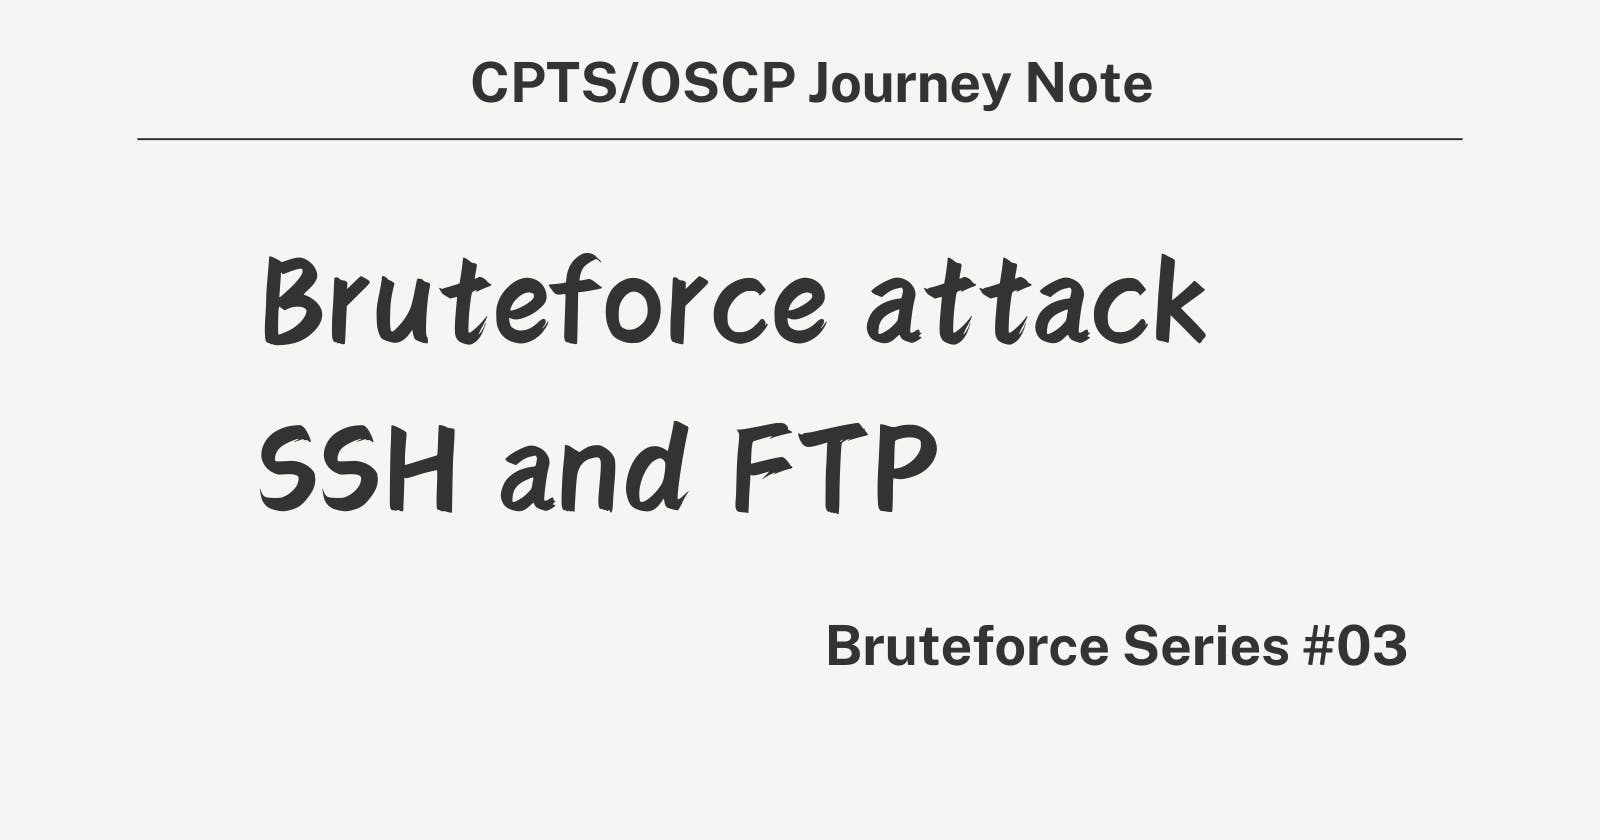 Bruteforce Series - Bruteforce attack SSH and FTP - 03